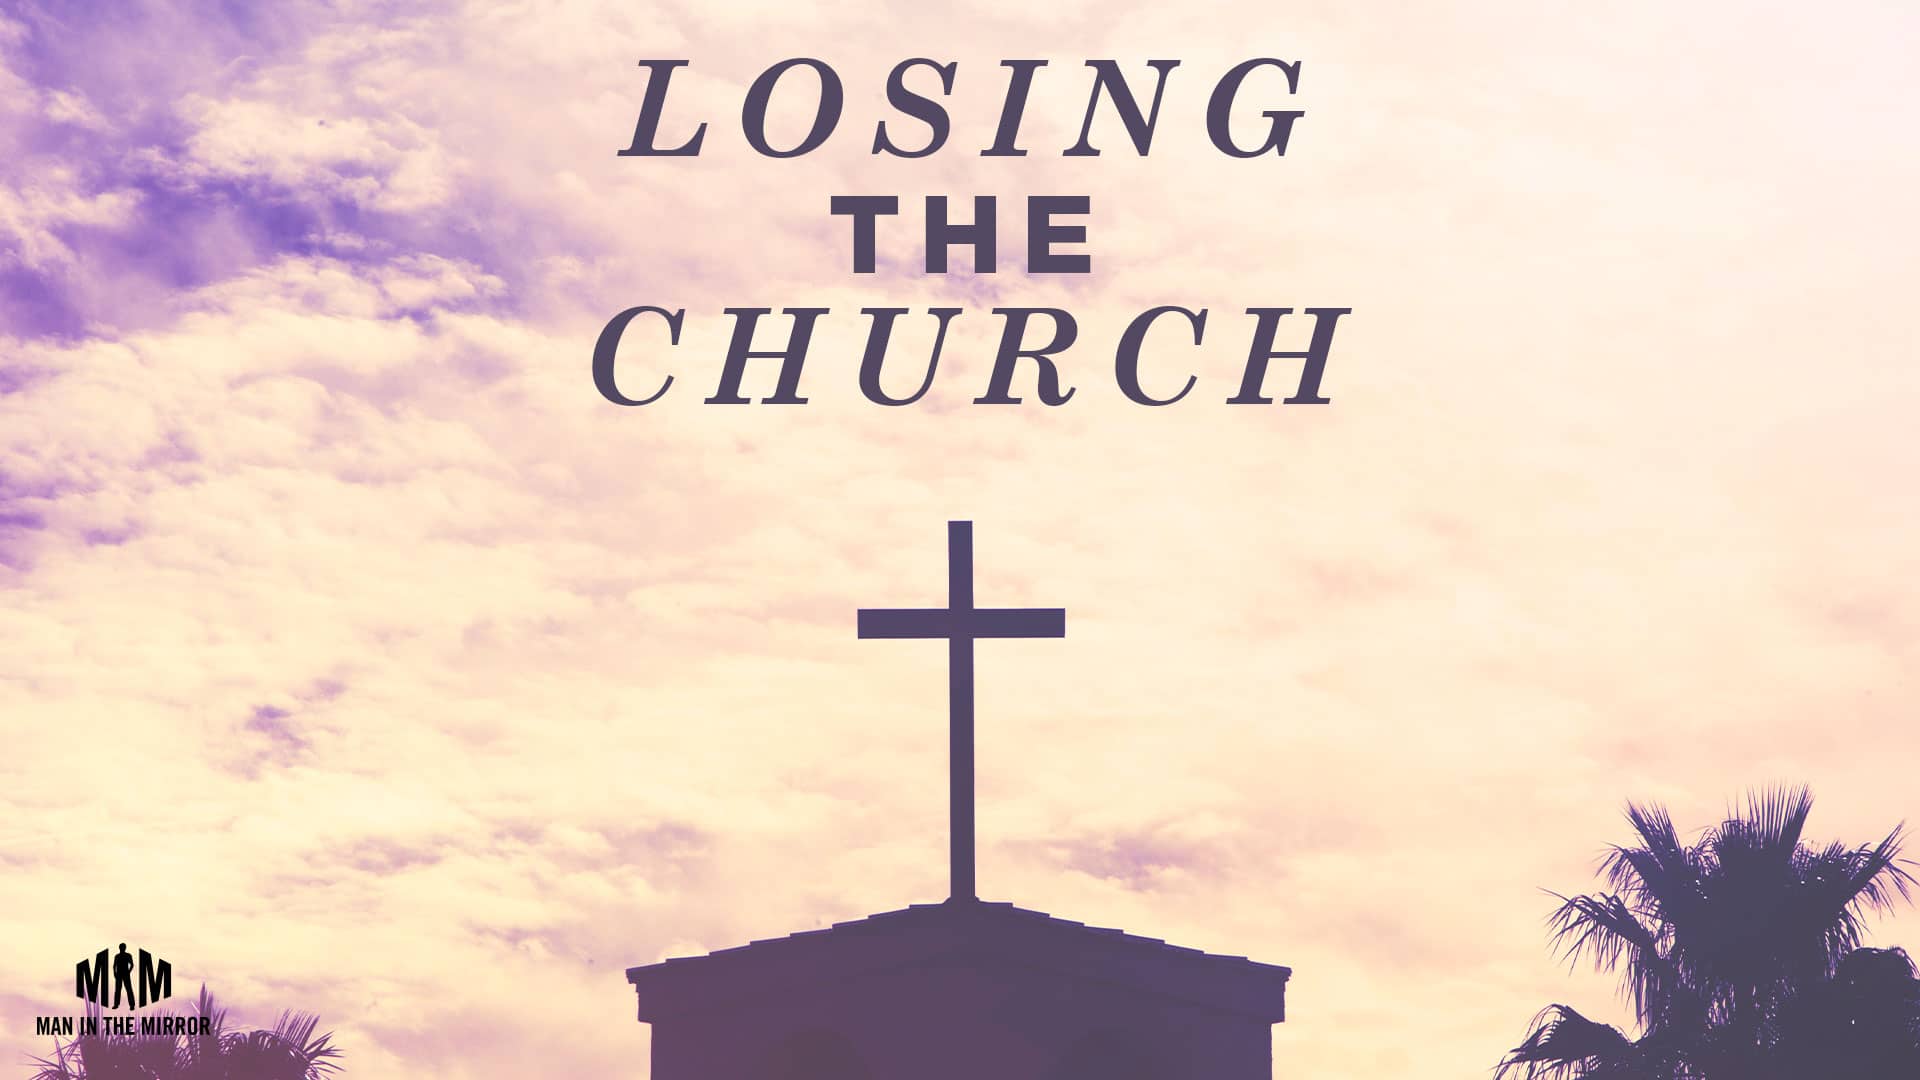 Some who have been distant from community for three months are growing comfortable in that isolation. And now that the habits of church attendance have been broken, the risk is that men who adjust to this new normal will be gone for good.